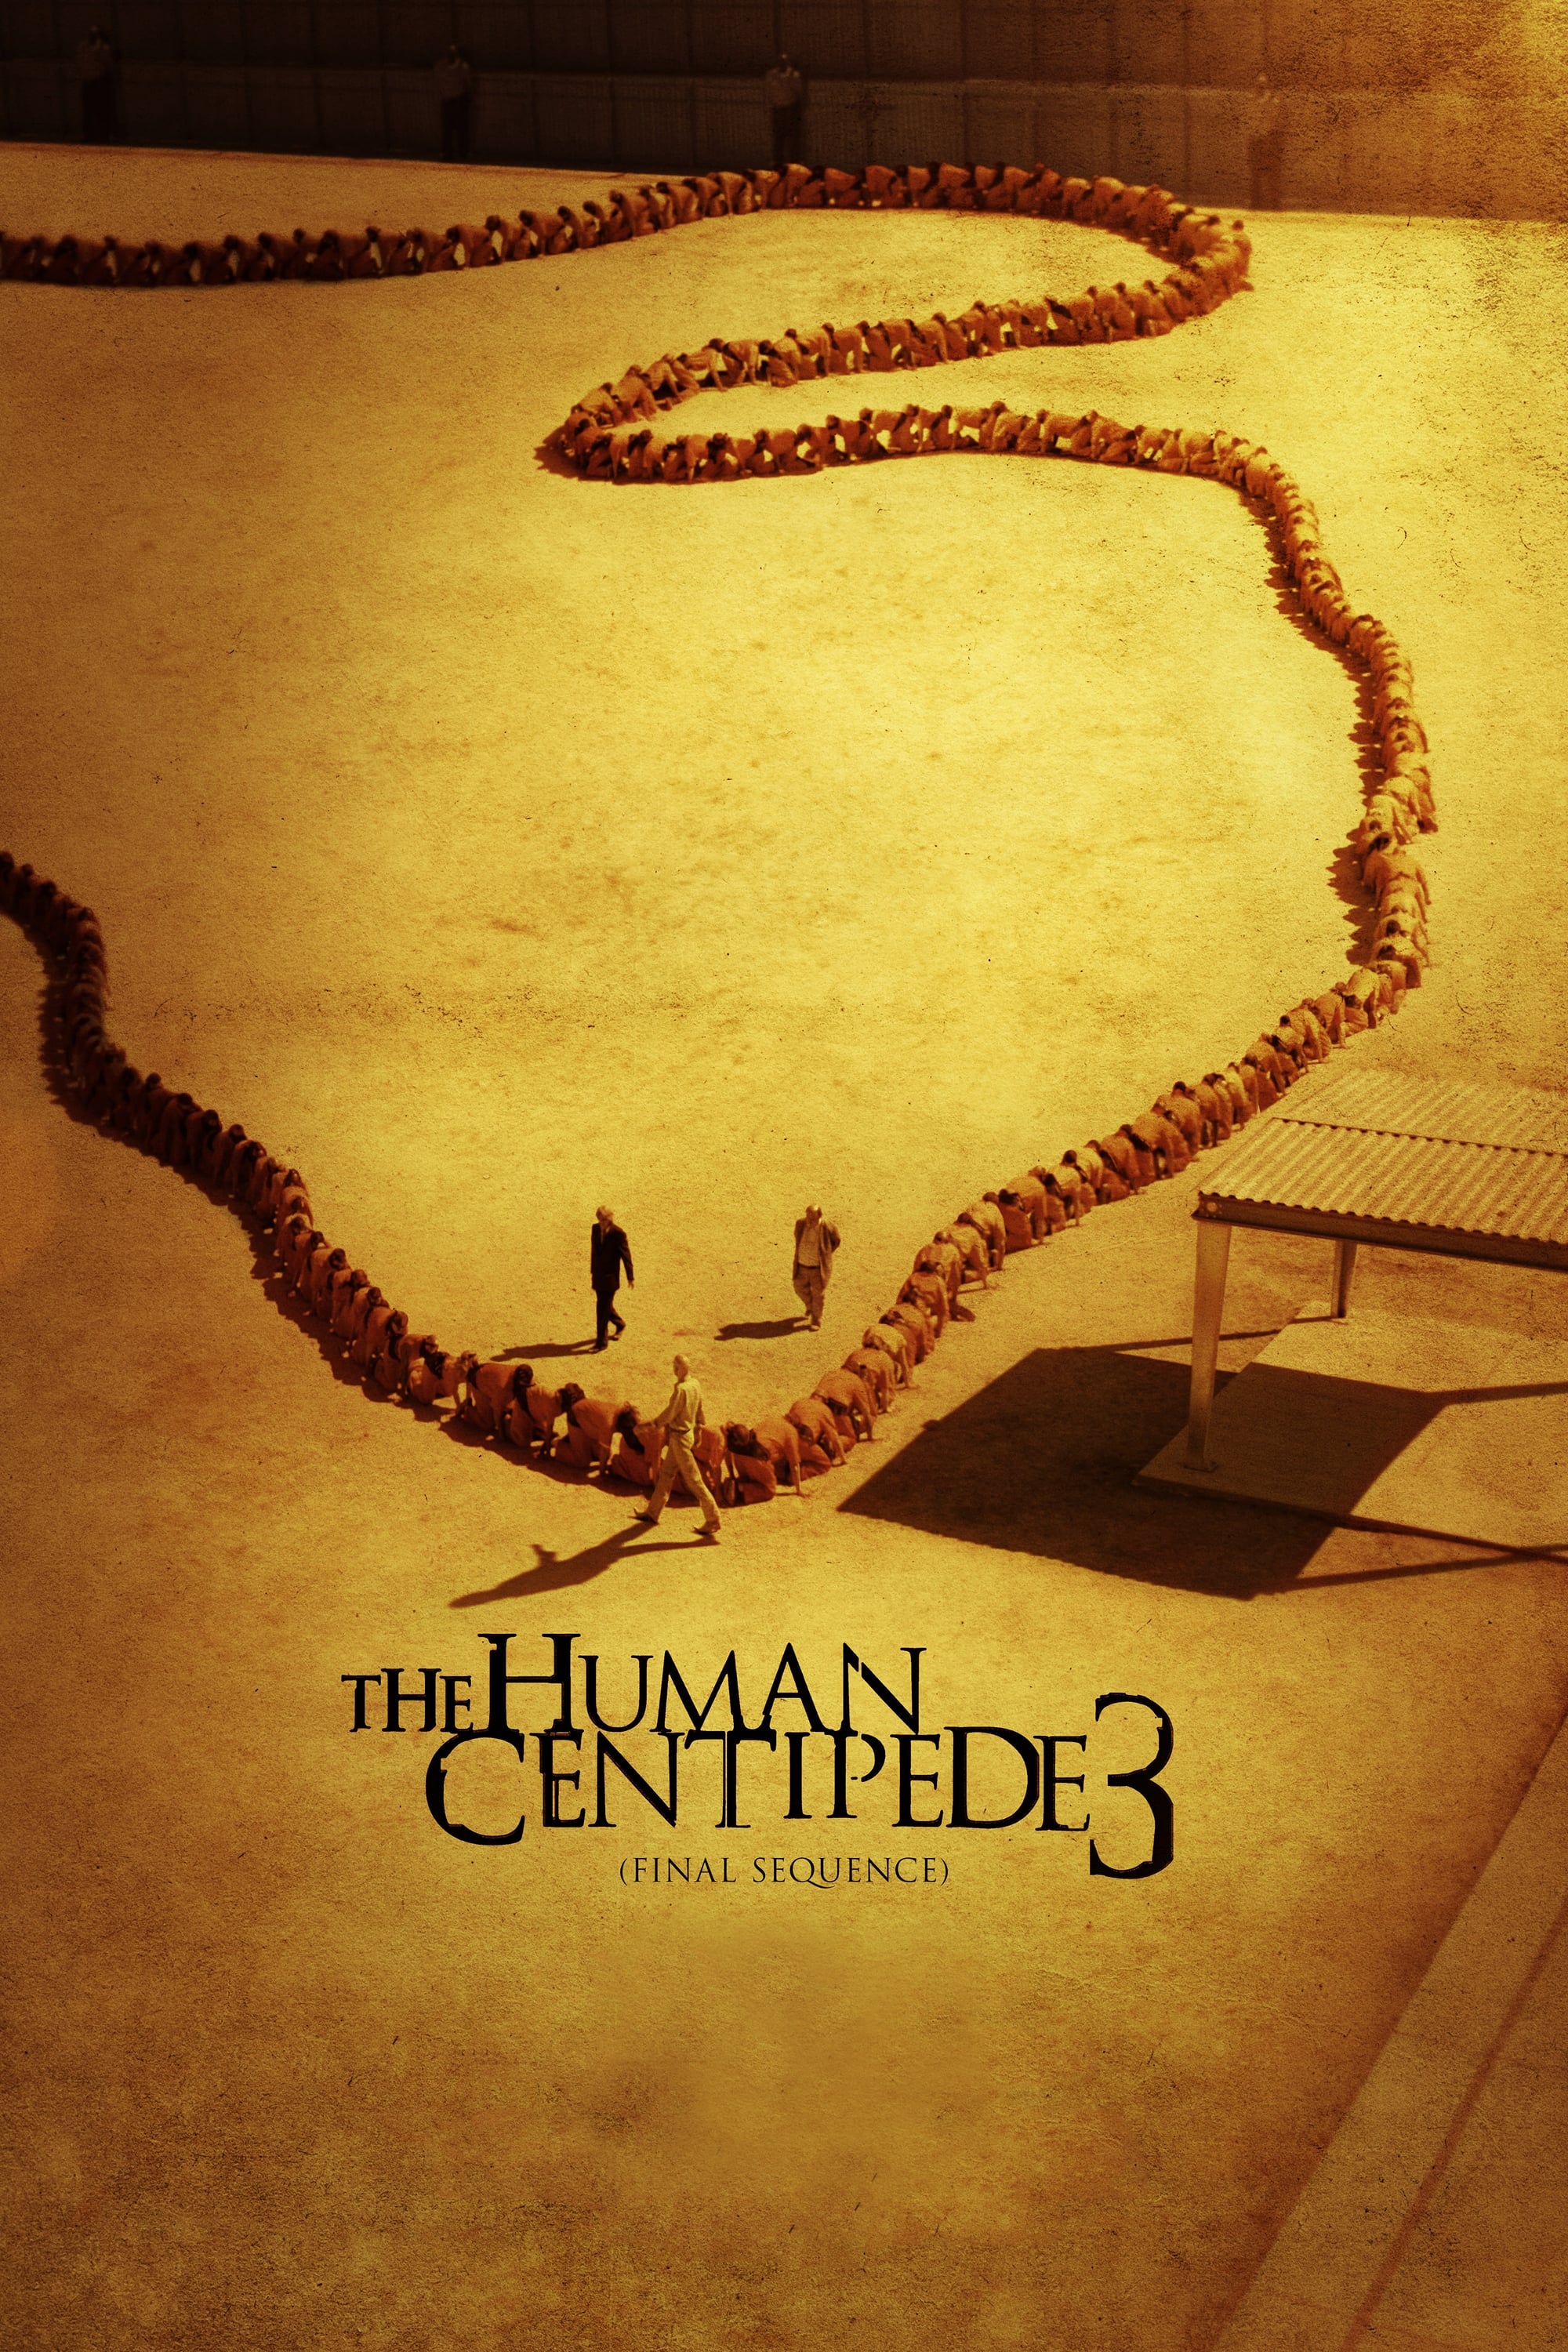 The Human Centipede 3